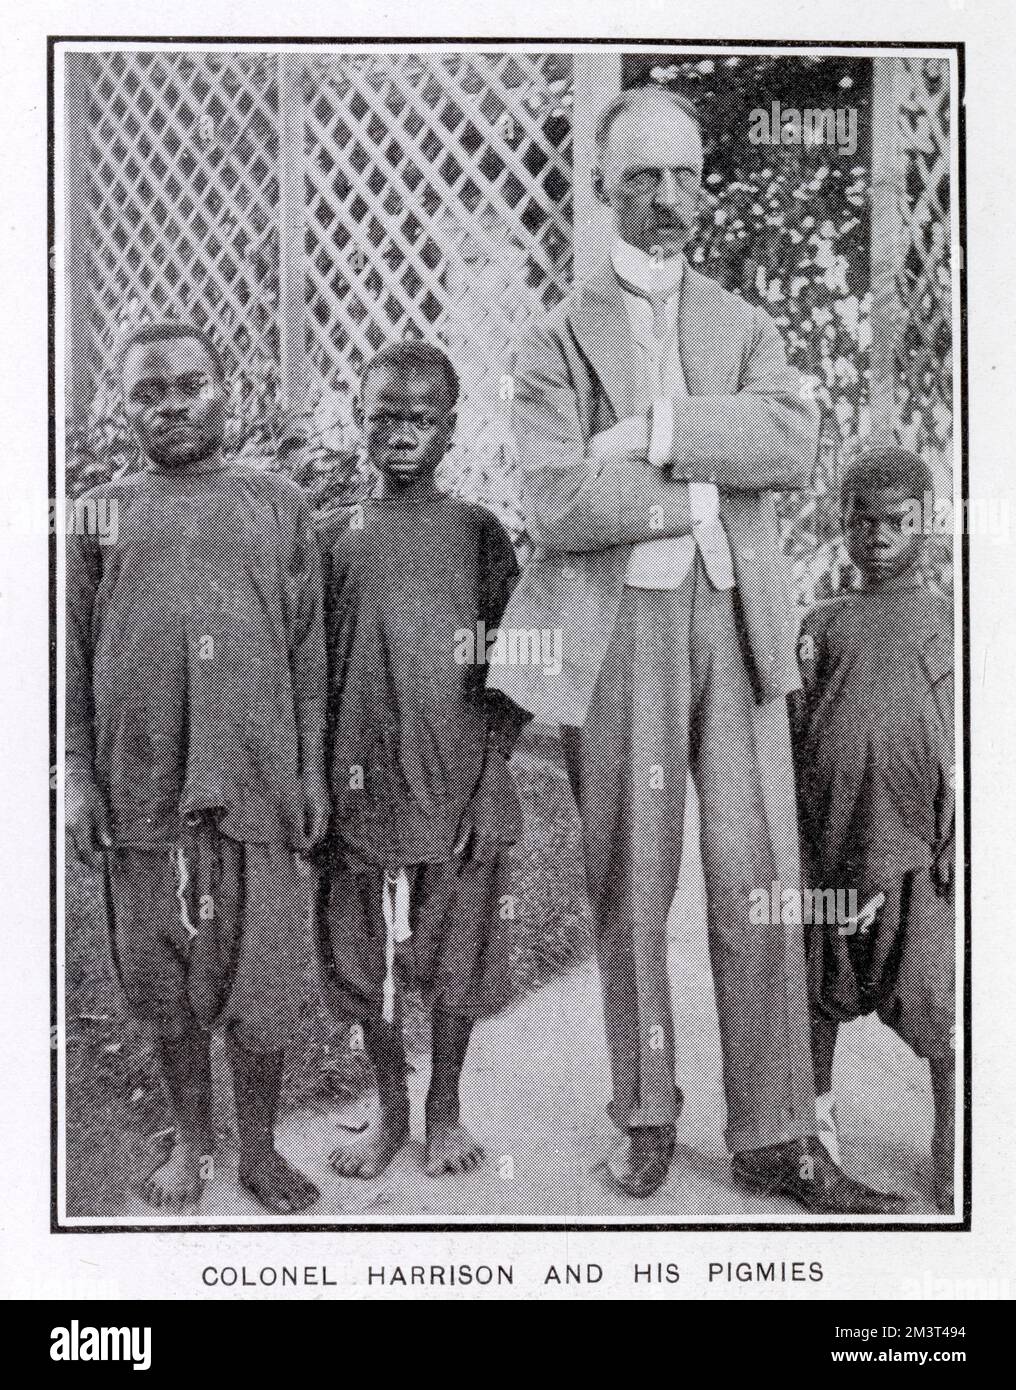 Colonel Harrison pictured with three of the six pigmies from the Ituri Forest in central Congo. In 1905, they were brought to the UK by Harrison of Brandeston Hall, E. Yorkshire and after their 14-week run at the Hippodrome, toured around the country, staying with Harrison in Yorkshire in between times. They returned to the Congo after two years.      Date: 1905 Stock Photo